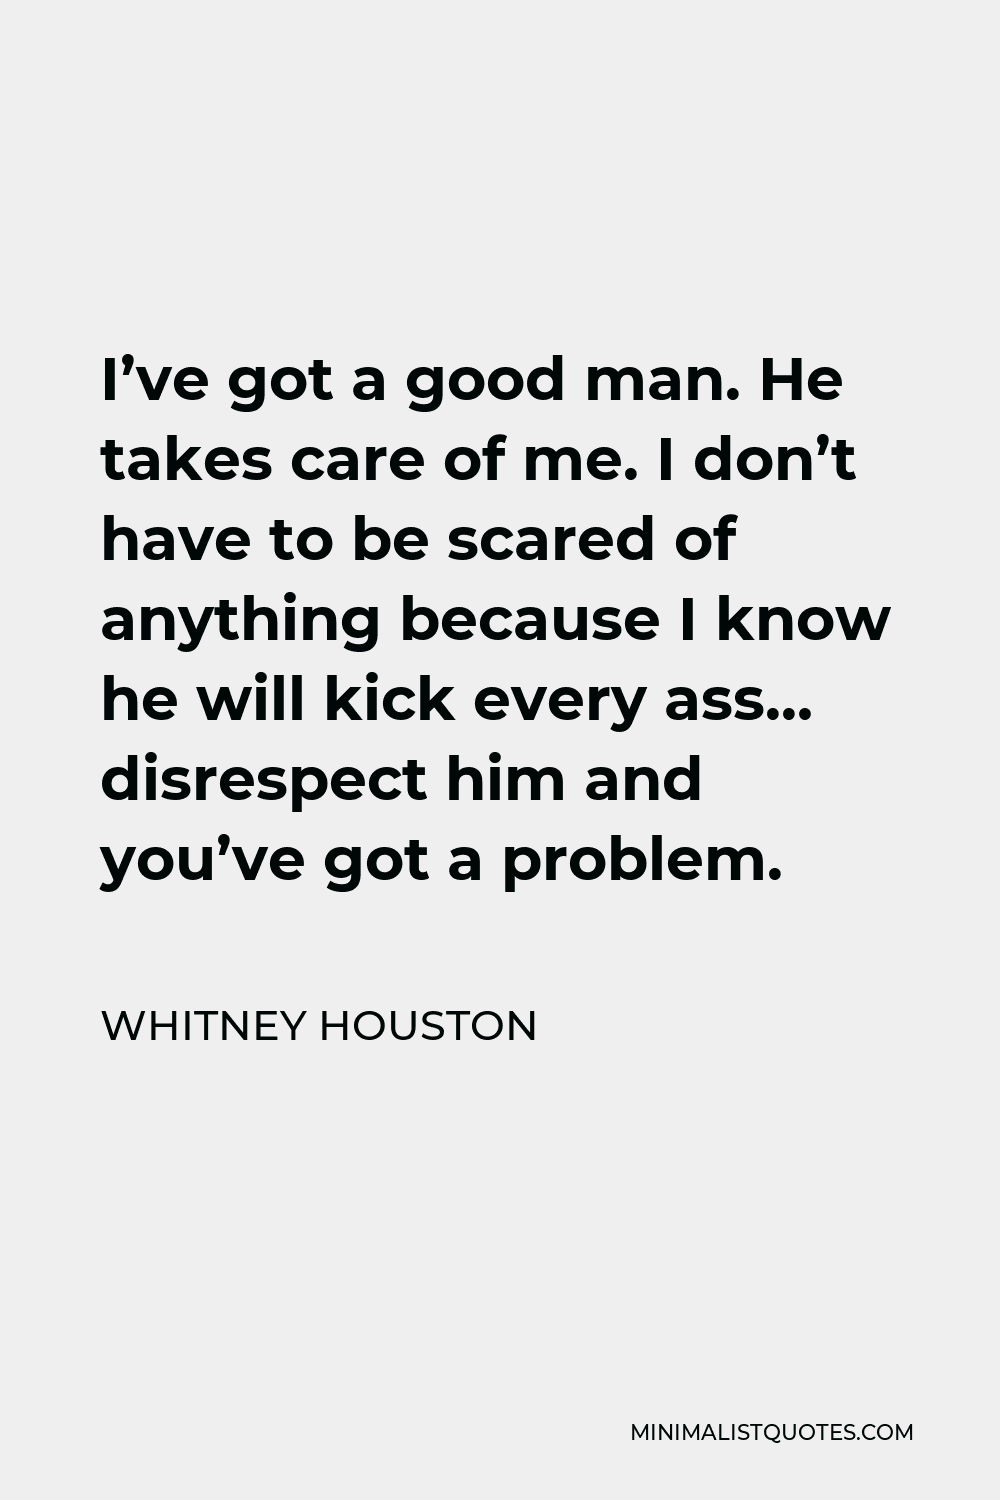 Whitney Houston Quote - I’ve got a good man. He takes care of me. I don’t have to be scared of anything because I know he will kick every ass… disrespect him and you’ve got a problem.